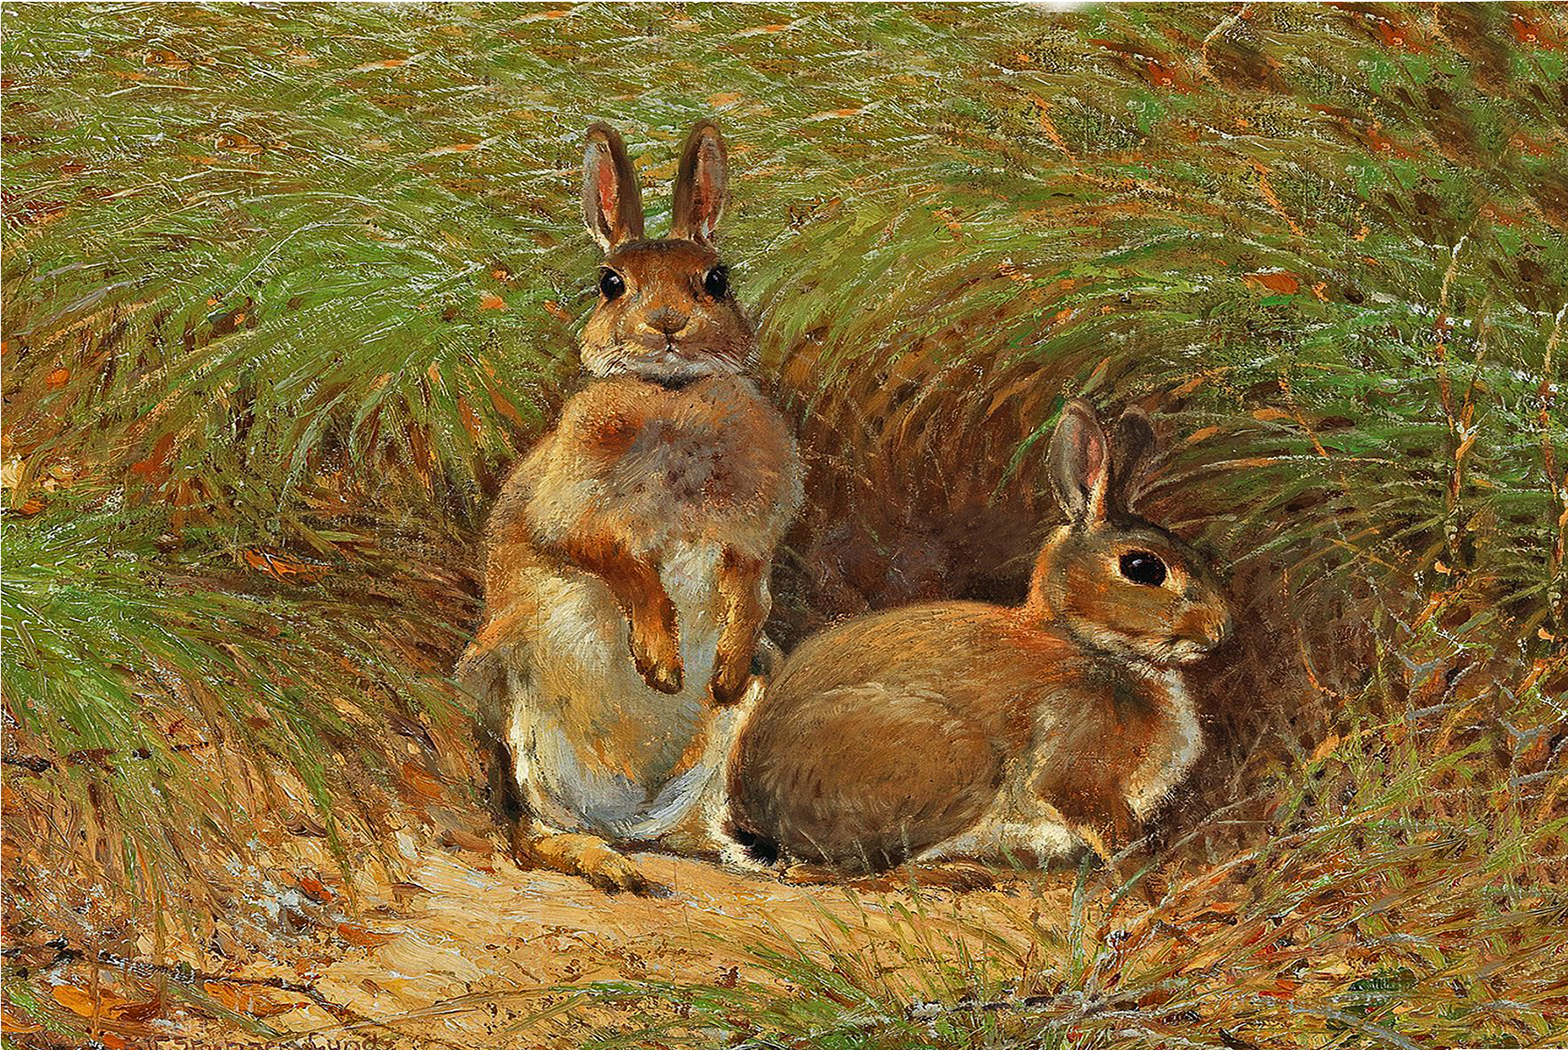 Farm/Pastoral Farm Rabbits Under Cover Framed Oil Painting Print on Canvas